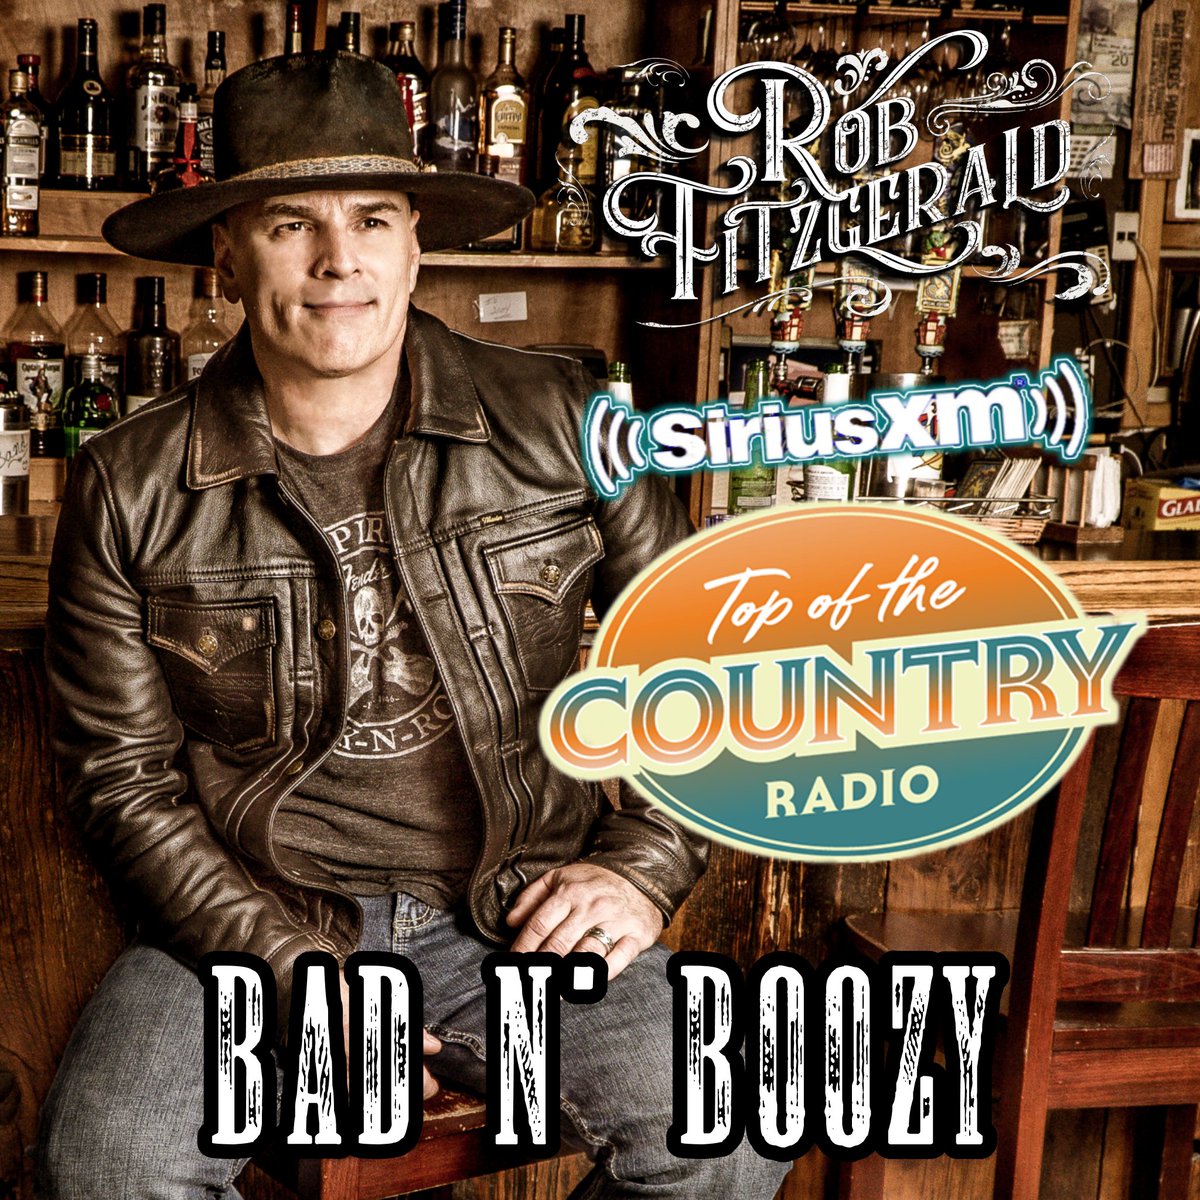 A huge Thank You to @SIRIUSXM Top of the Country #171 for adding 'Bad N' Boozy' into rotation. Much appreciated. #siriusxm #topofthecountry